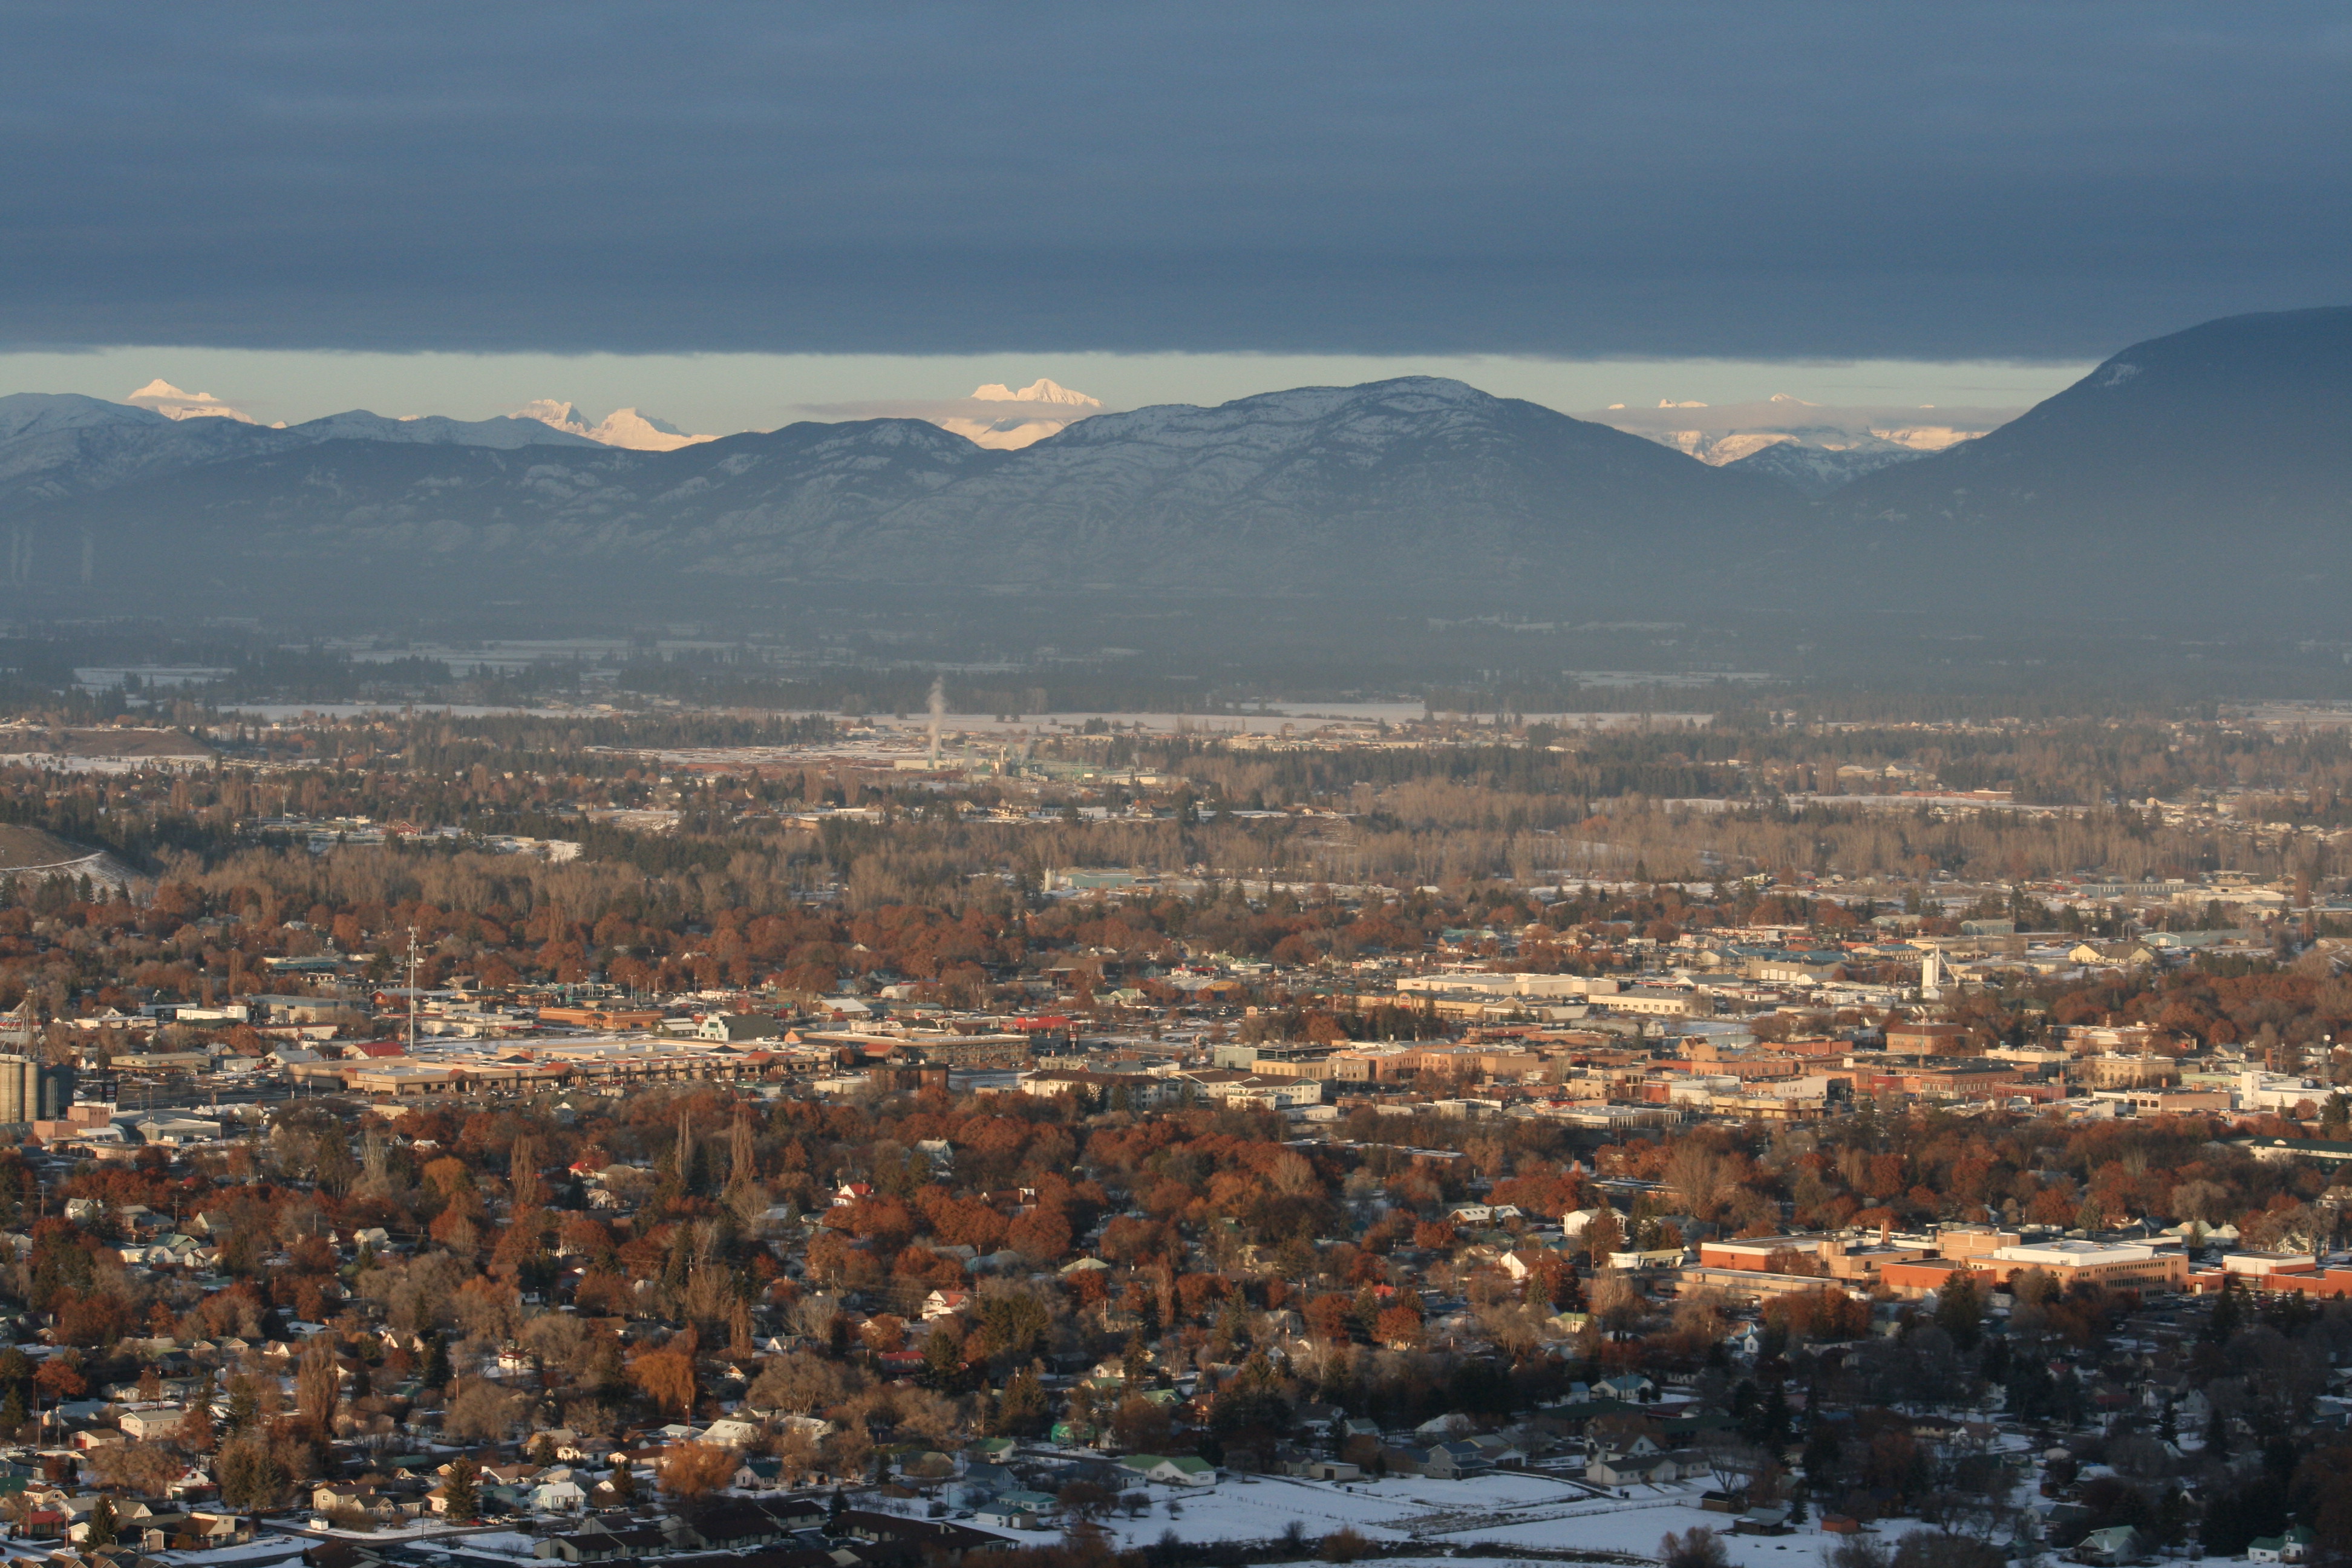 Kalispell (,  Montana Salish: Ql̓ispé, Kutenai language: kqayaqawakⱡuʔnam) is a city in Montana and the county seat of Flathead County, Montana, United States. The 2020 census put Kalispell's population at 24,558. In Montana's northwest region, it is the largest city and the commercial center of the Kalispell Micropolitan Statistical Area. The name Kalispell is a Salish word meaning "flat land above the lake".